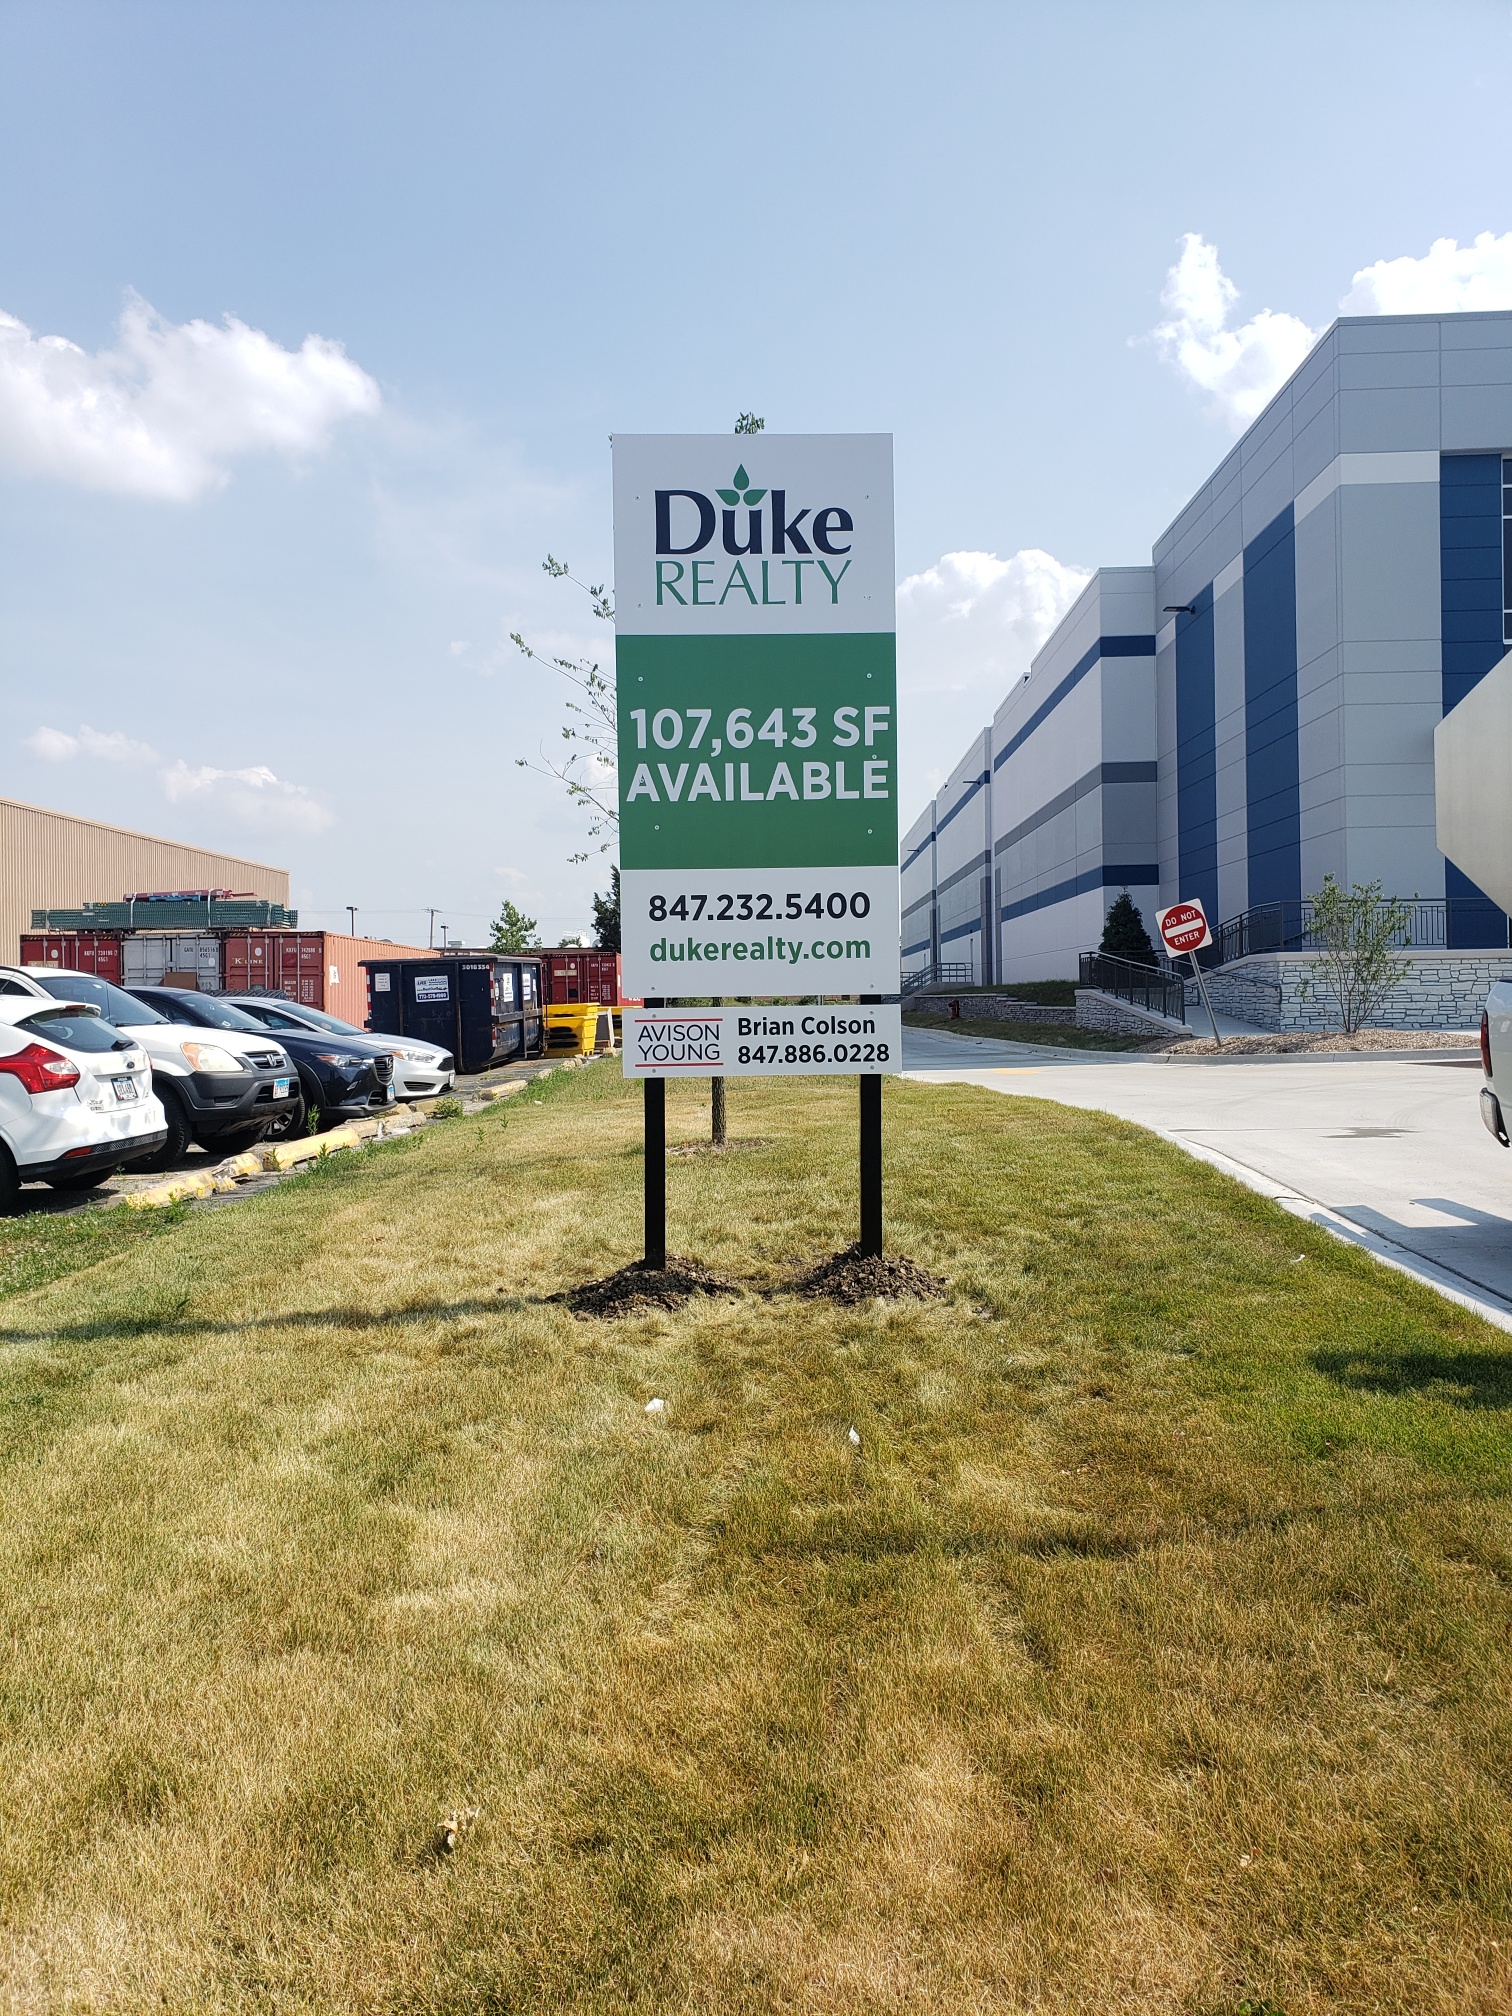 Commercial Real Estate Signs in Chicago